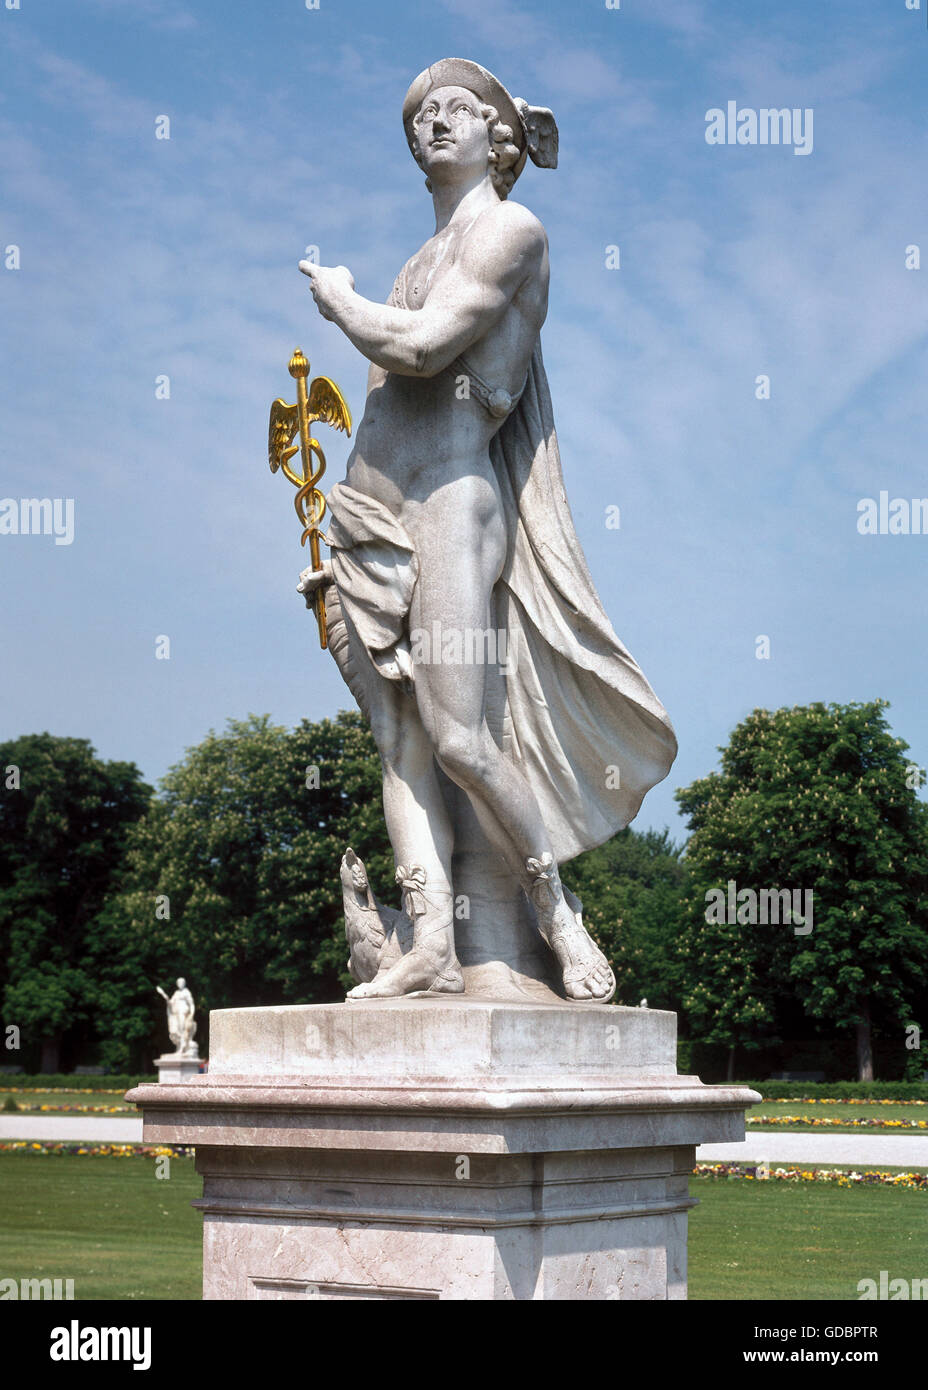 Hermes, Greek god, full length, sculpture by Ignaz Guenther (1725-1775),  marble, middle of the 18th century, Nymphenburg castle park, Munich Stock  Photo - Alamy